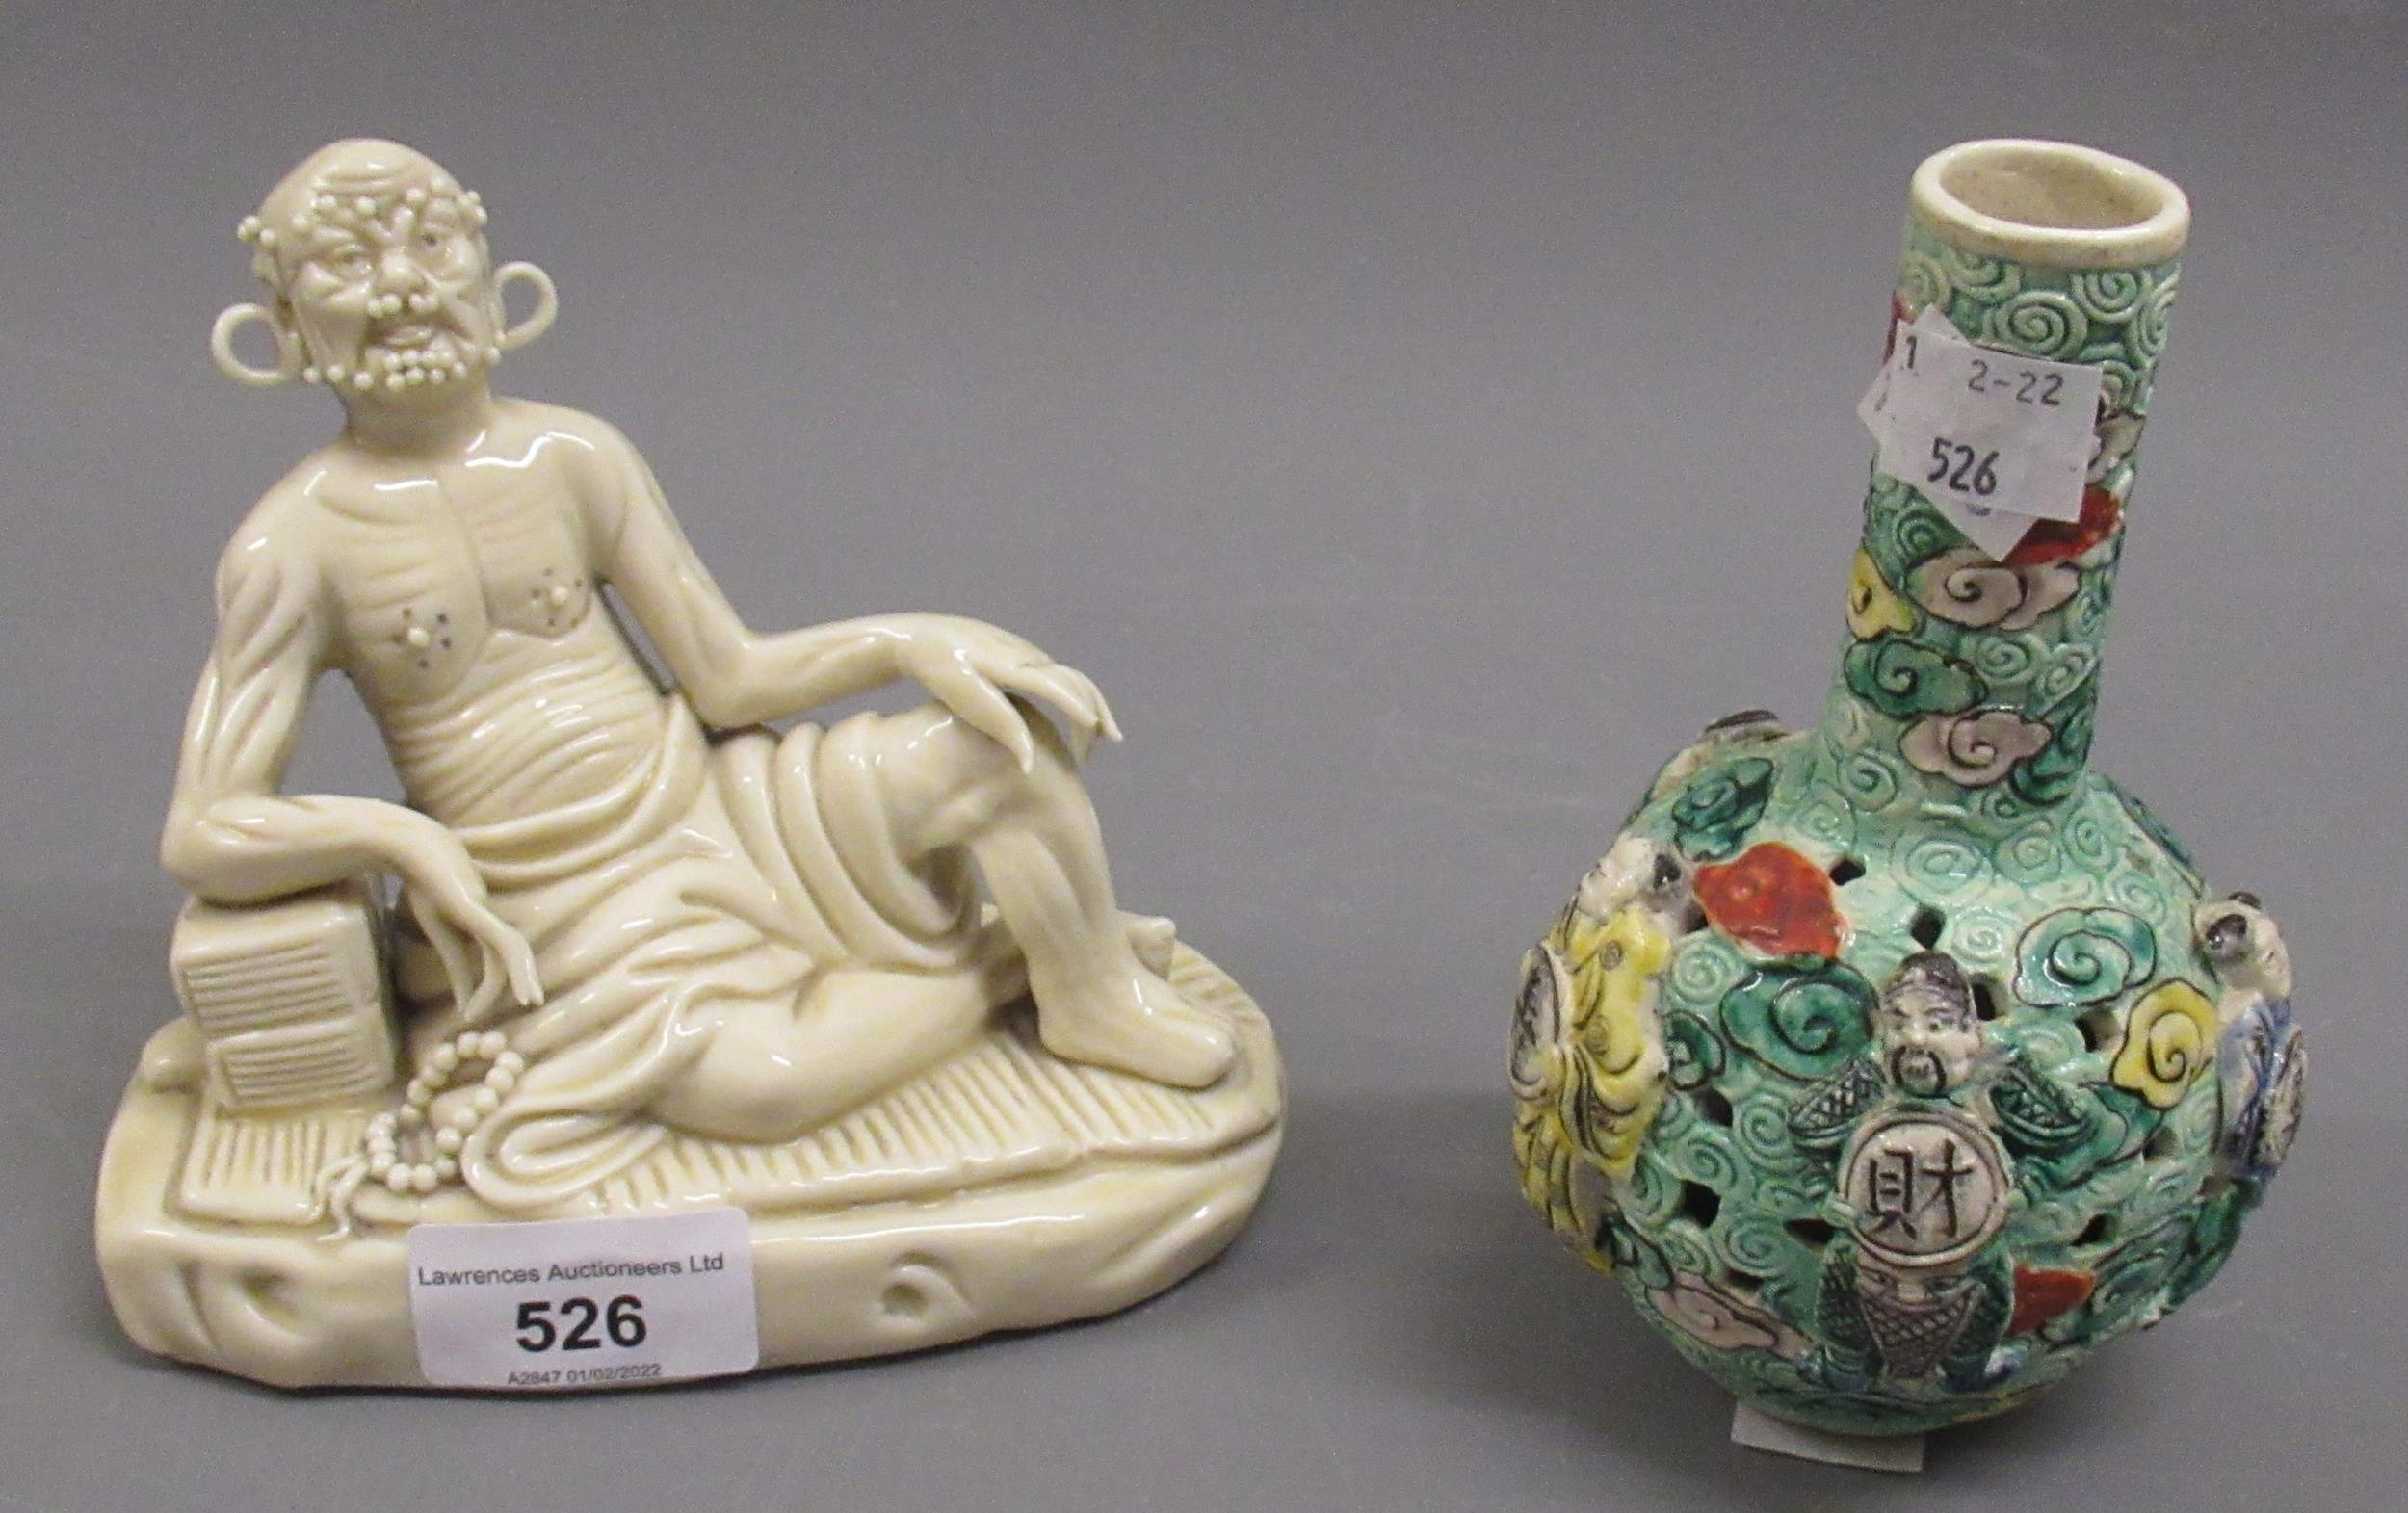 20th Century Oriental porcelain figure of a reclining man, with character marks to back and a